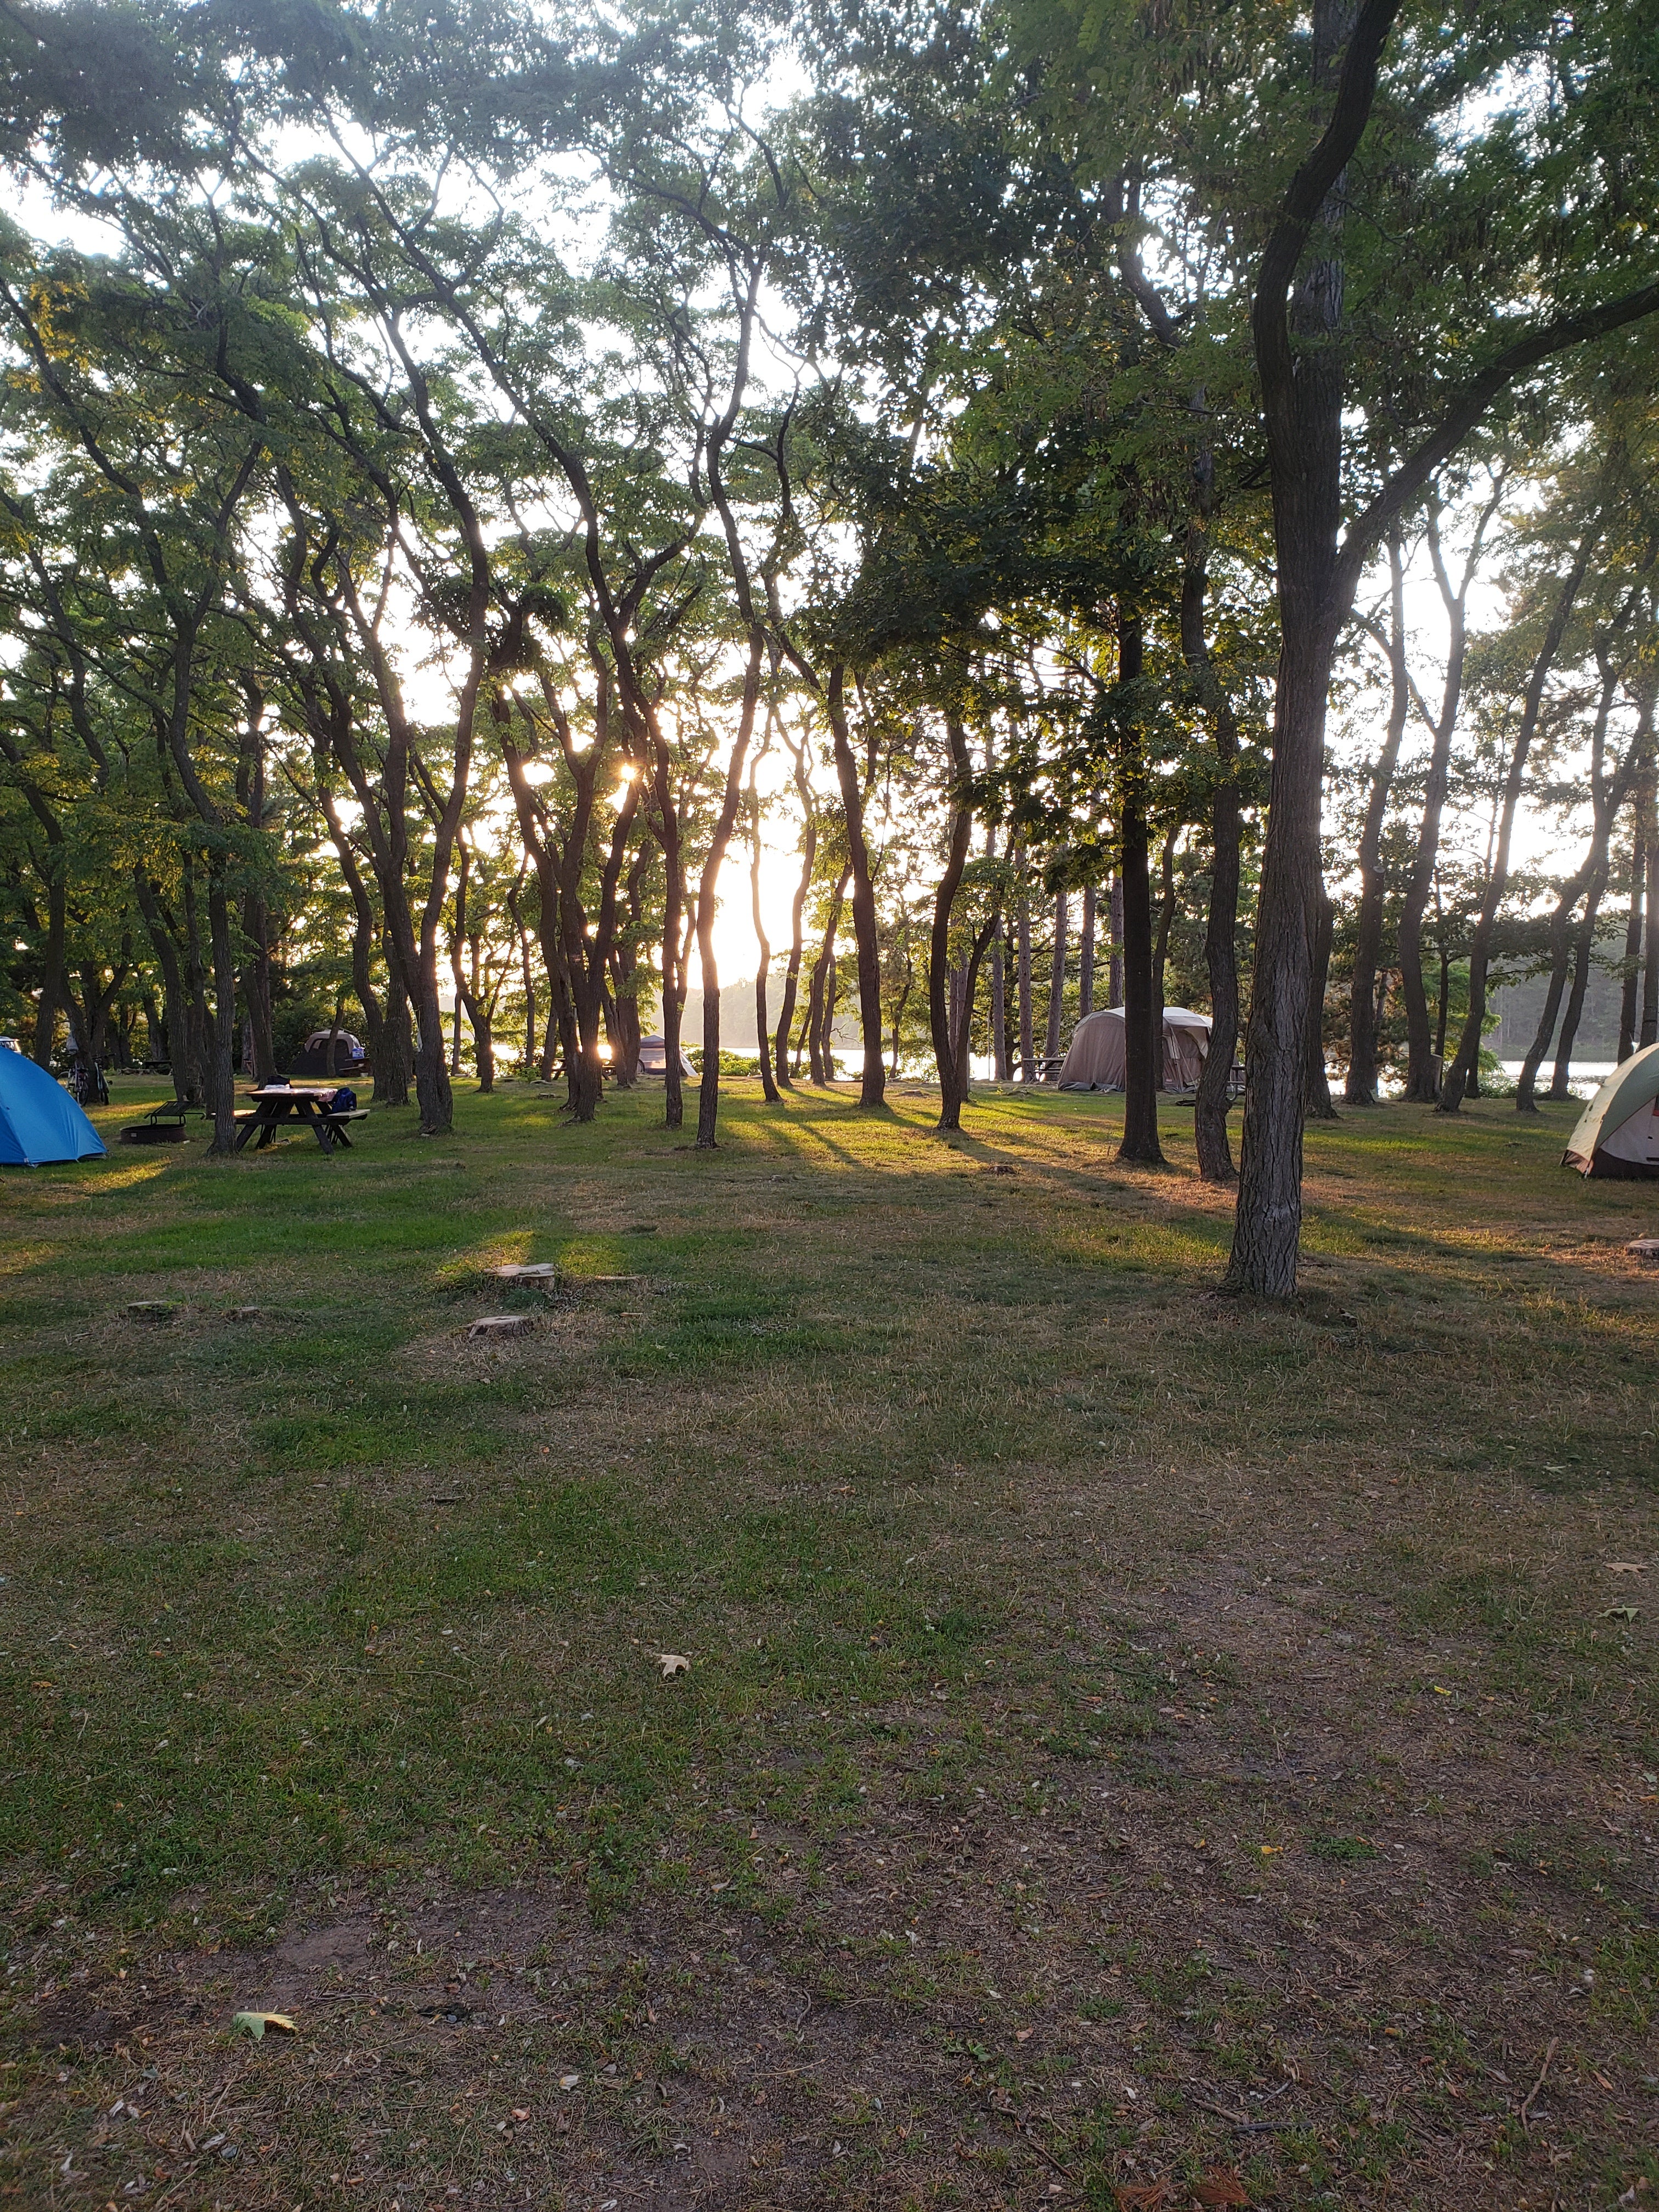 This was our first night there and we were taking a walk around the grounds. The lake is just beyond the trees here. And to the right, there is a designated swim area and boat launch.